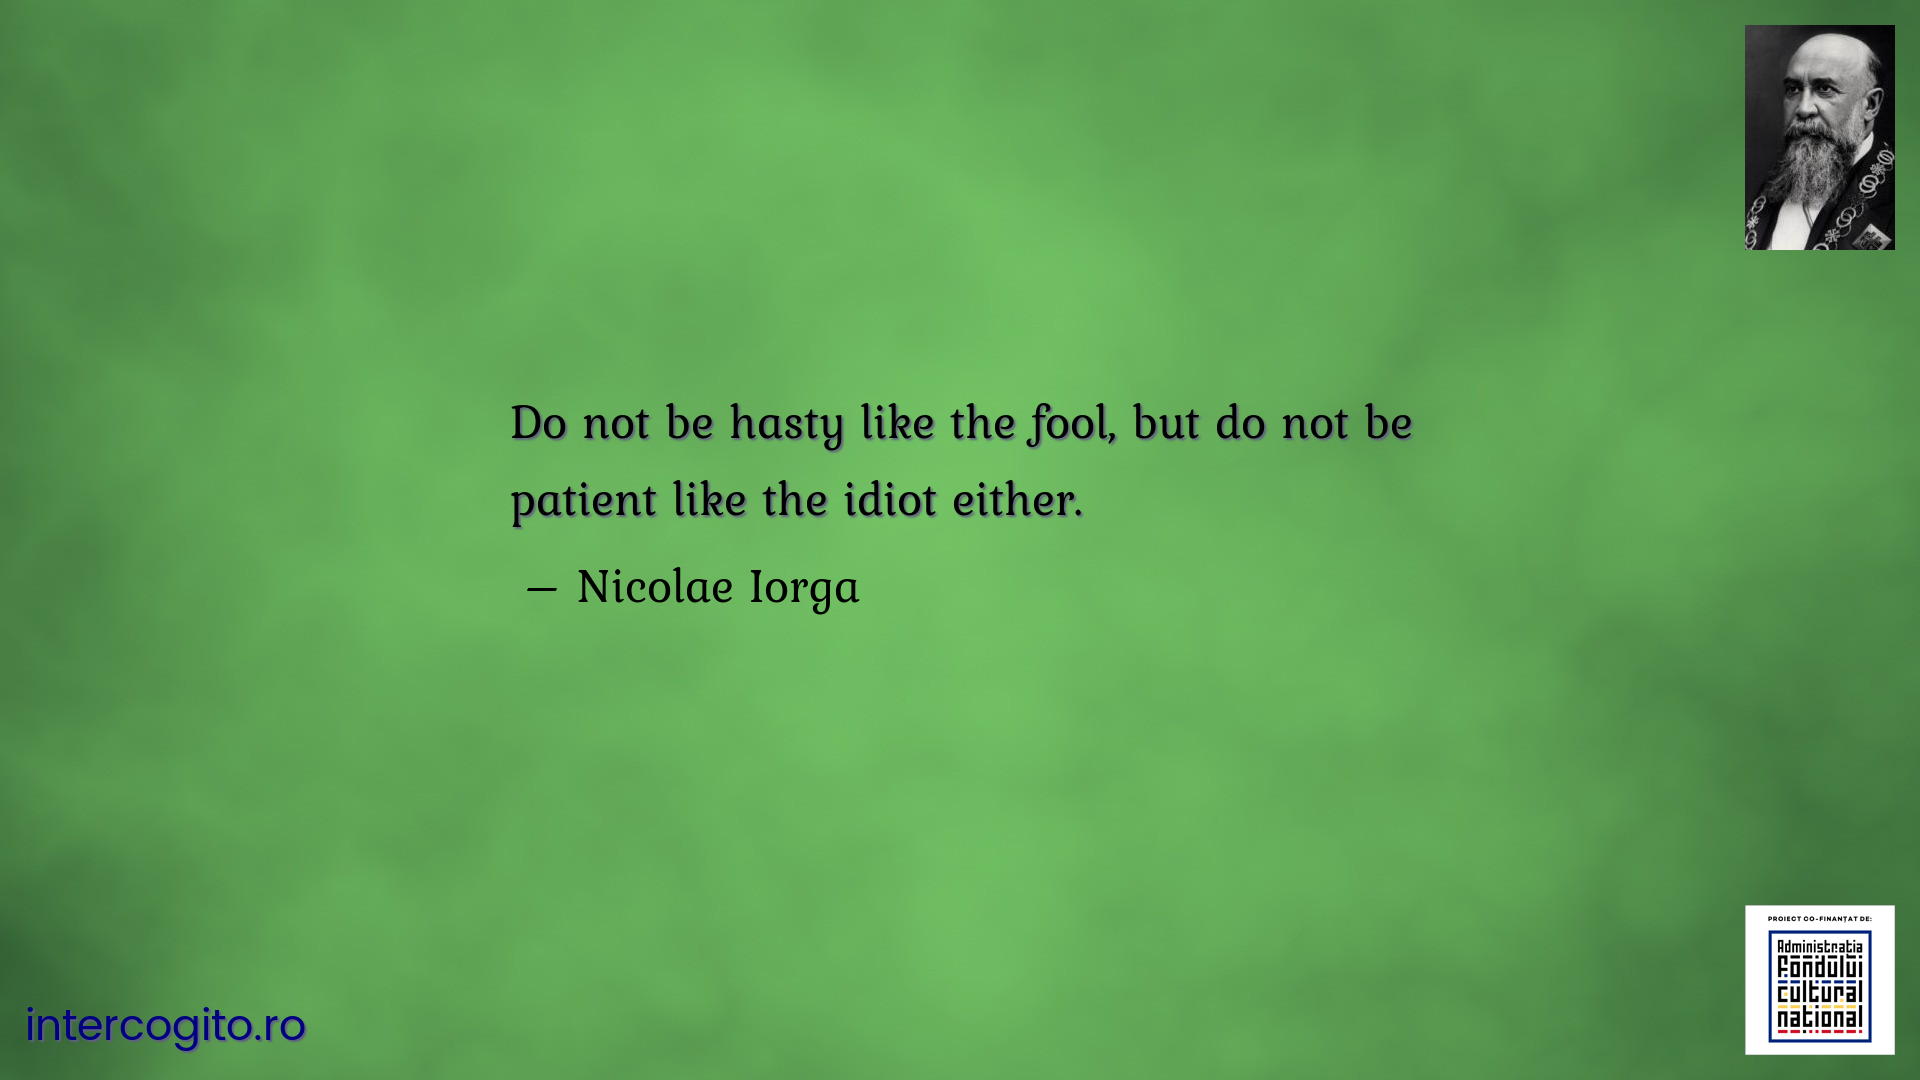 Do not be hasty like the fool, but do not be patient like the idiot either.